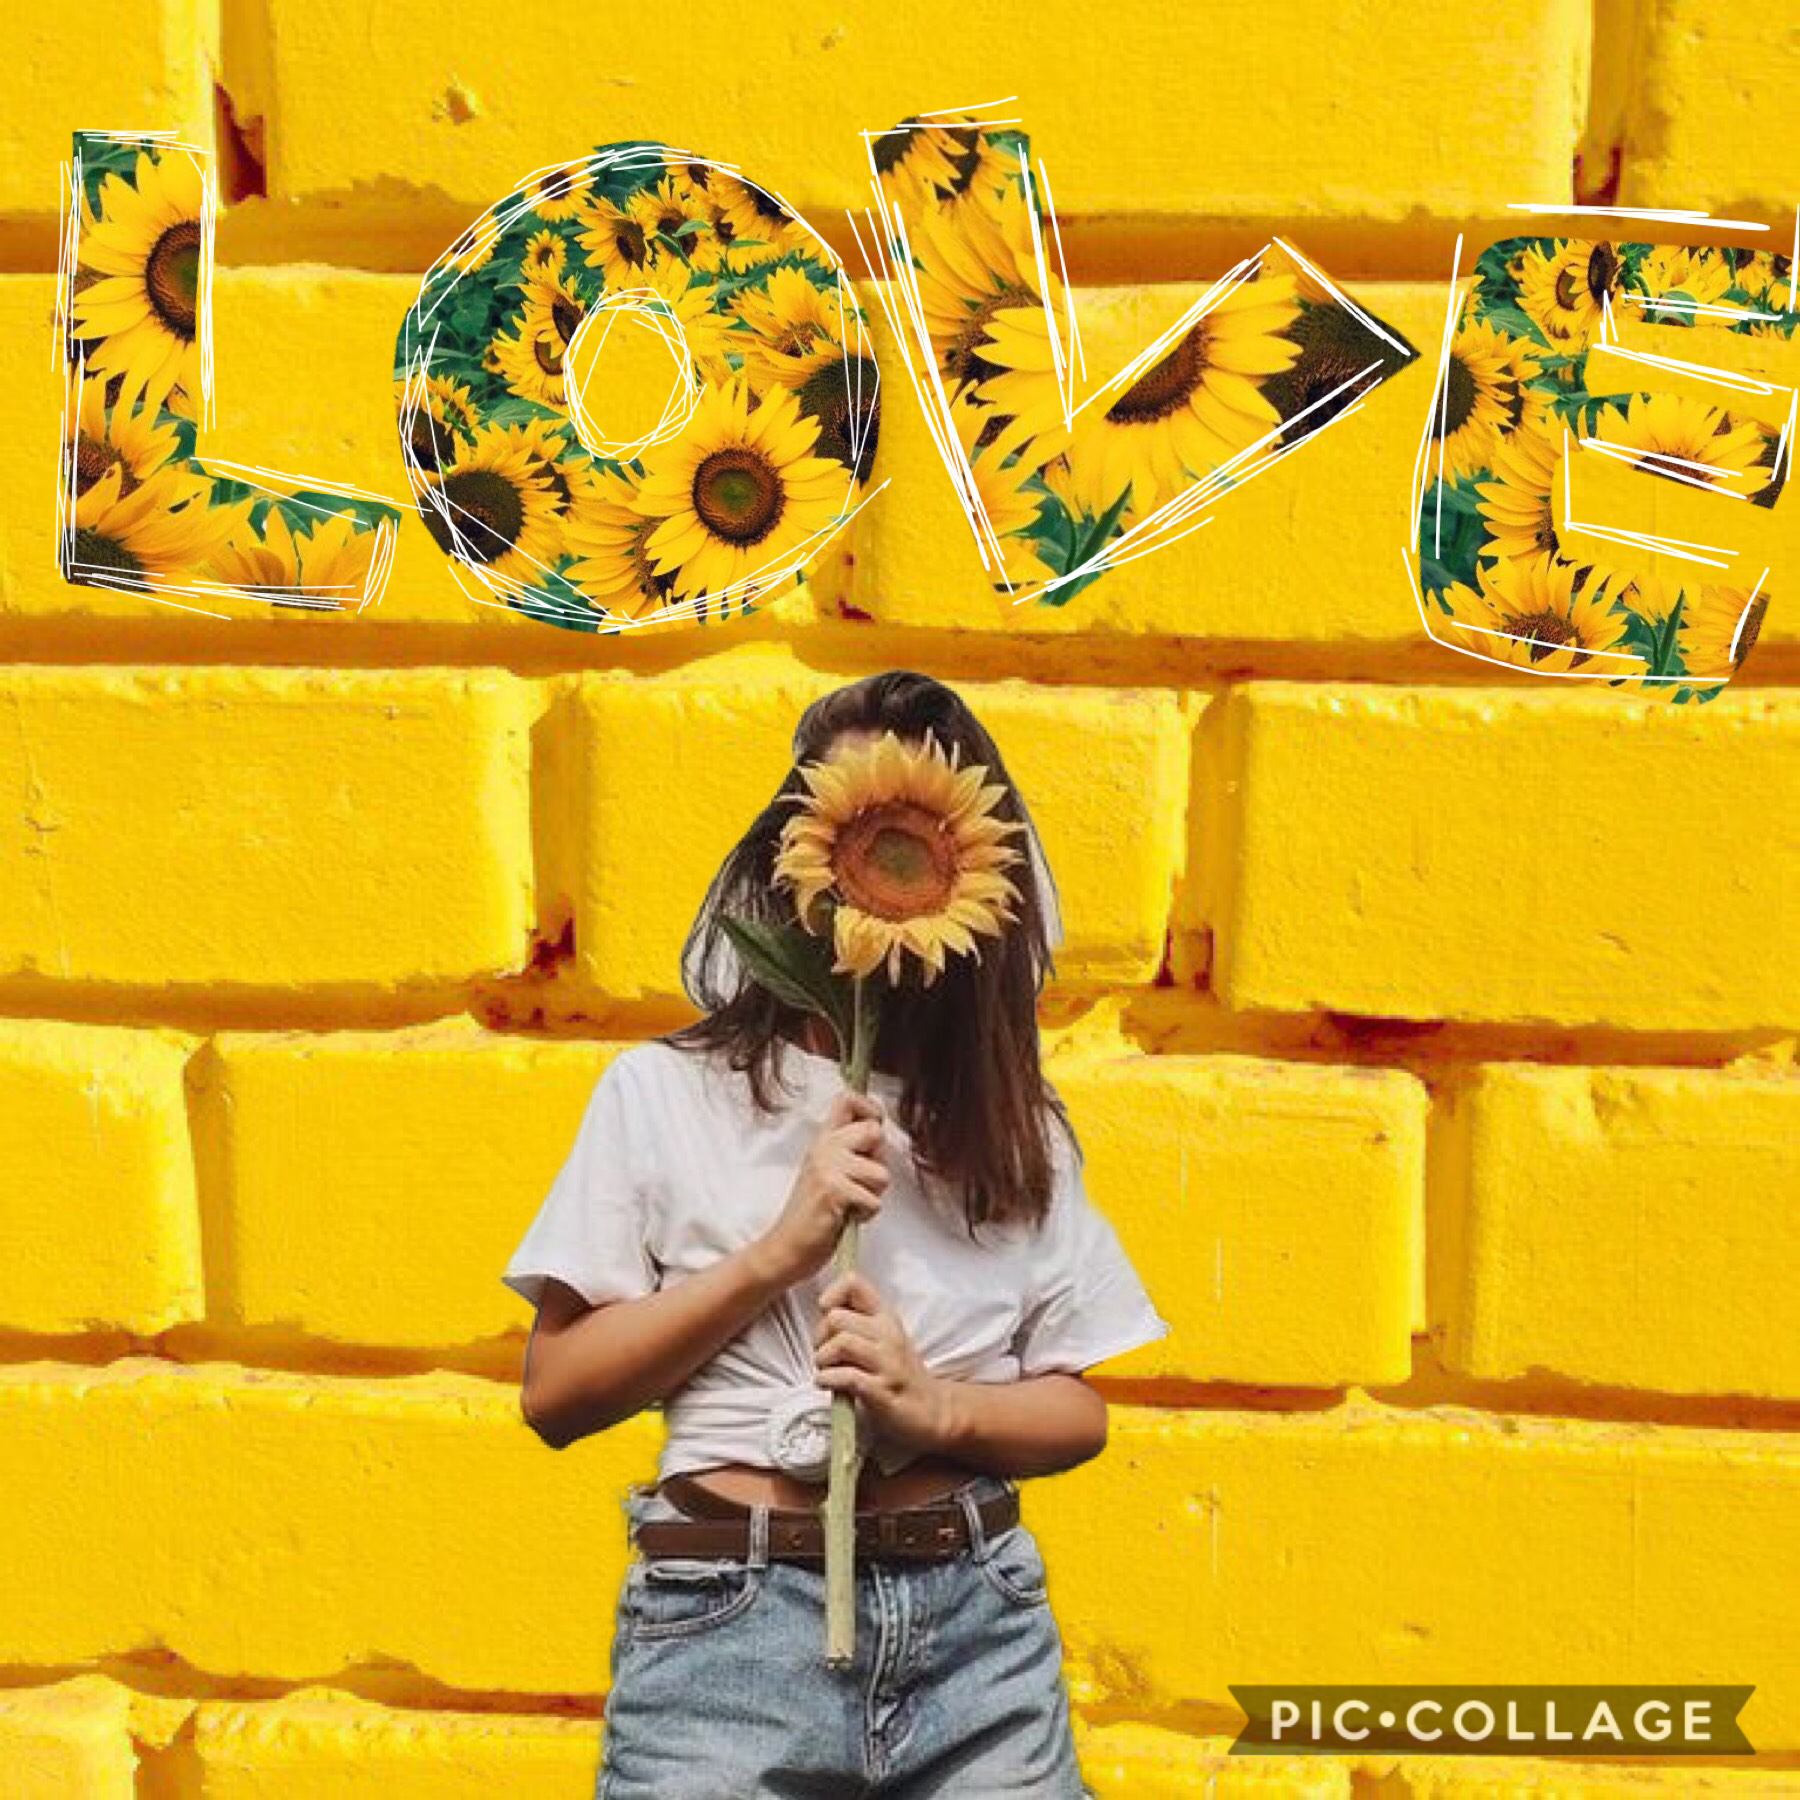 🌻tap🌻
❤️love y'all❤️